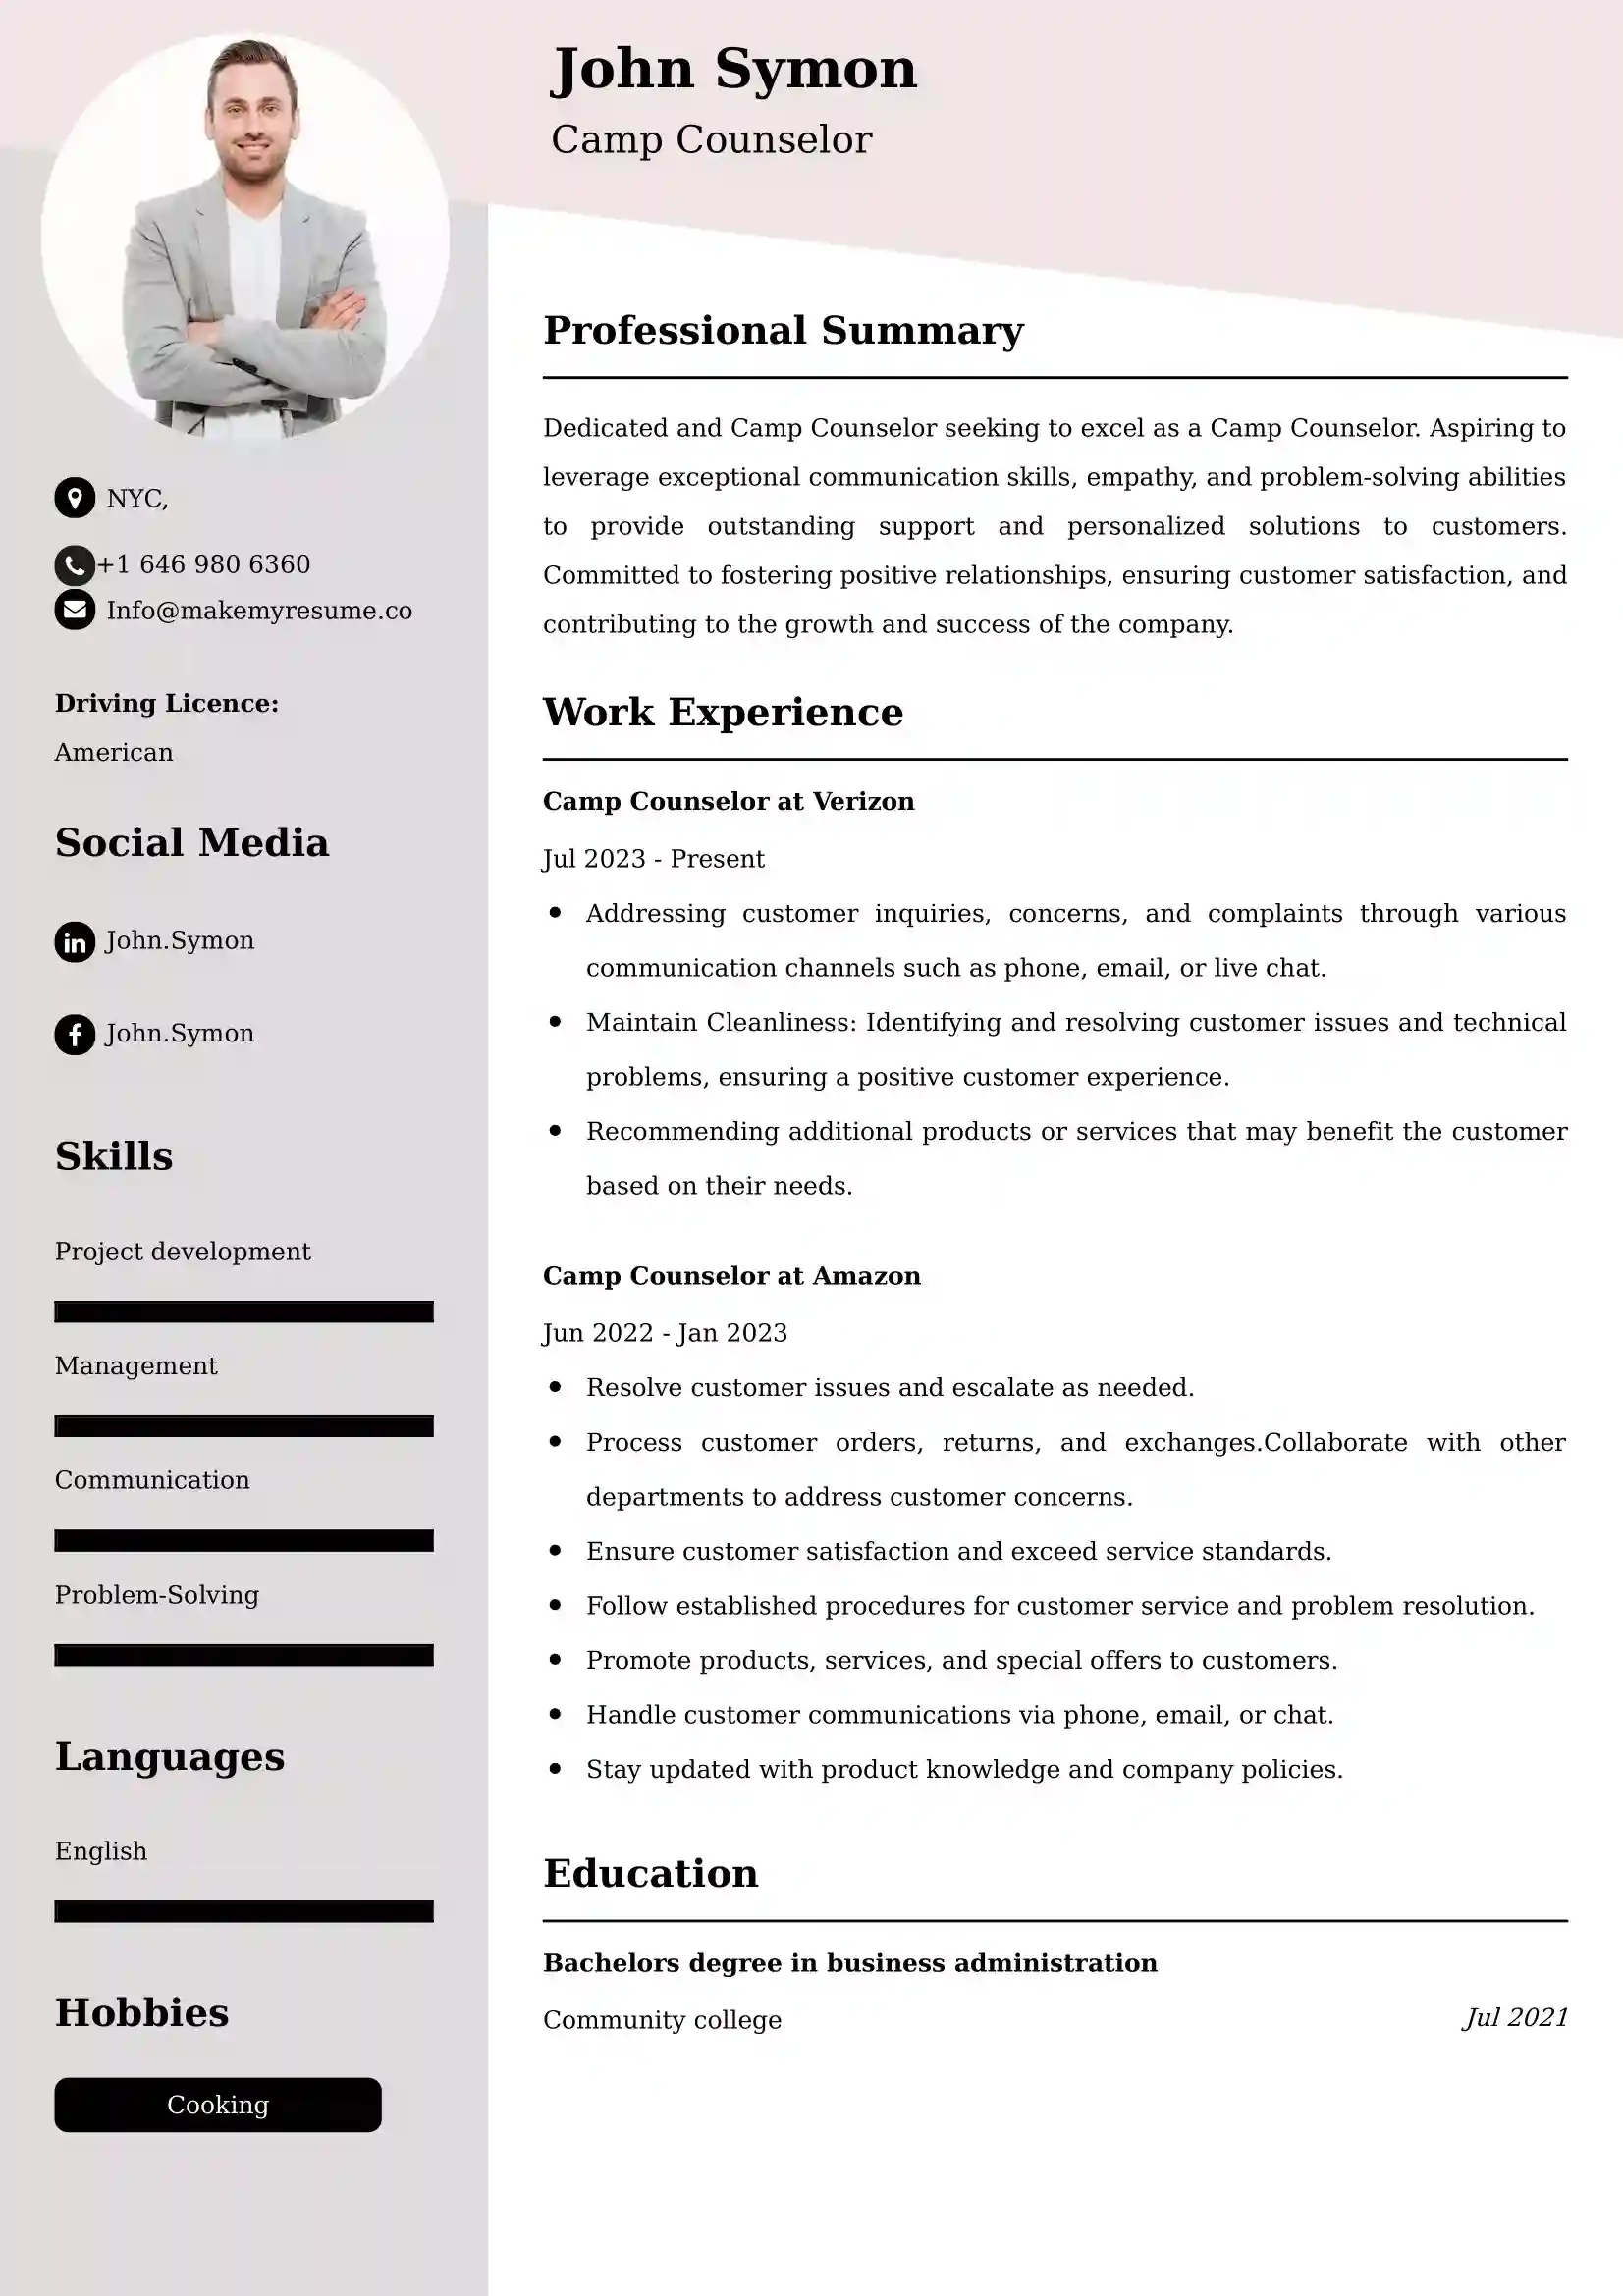 Camp Counselor Resume Examples for UAE